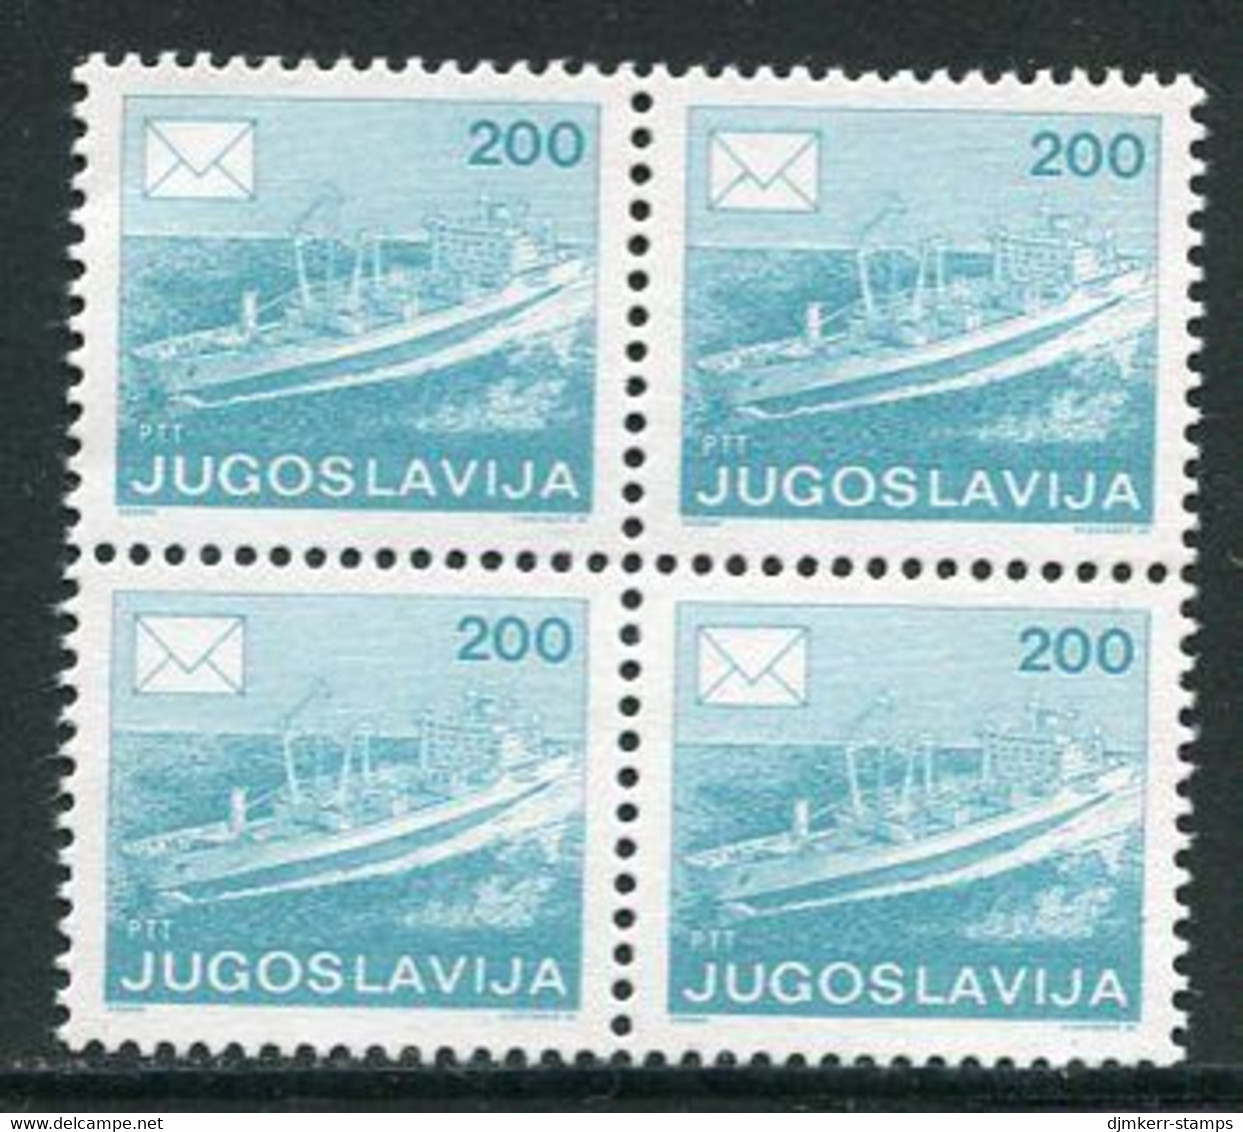 YUGOSLAVIA 1986 (1989) Postal Services Definitive 200 D. Perforated 12½ Block Of 4 MNH / **.  Michel 2176D - Nuovi